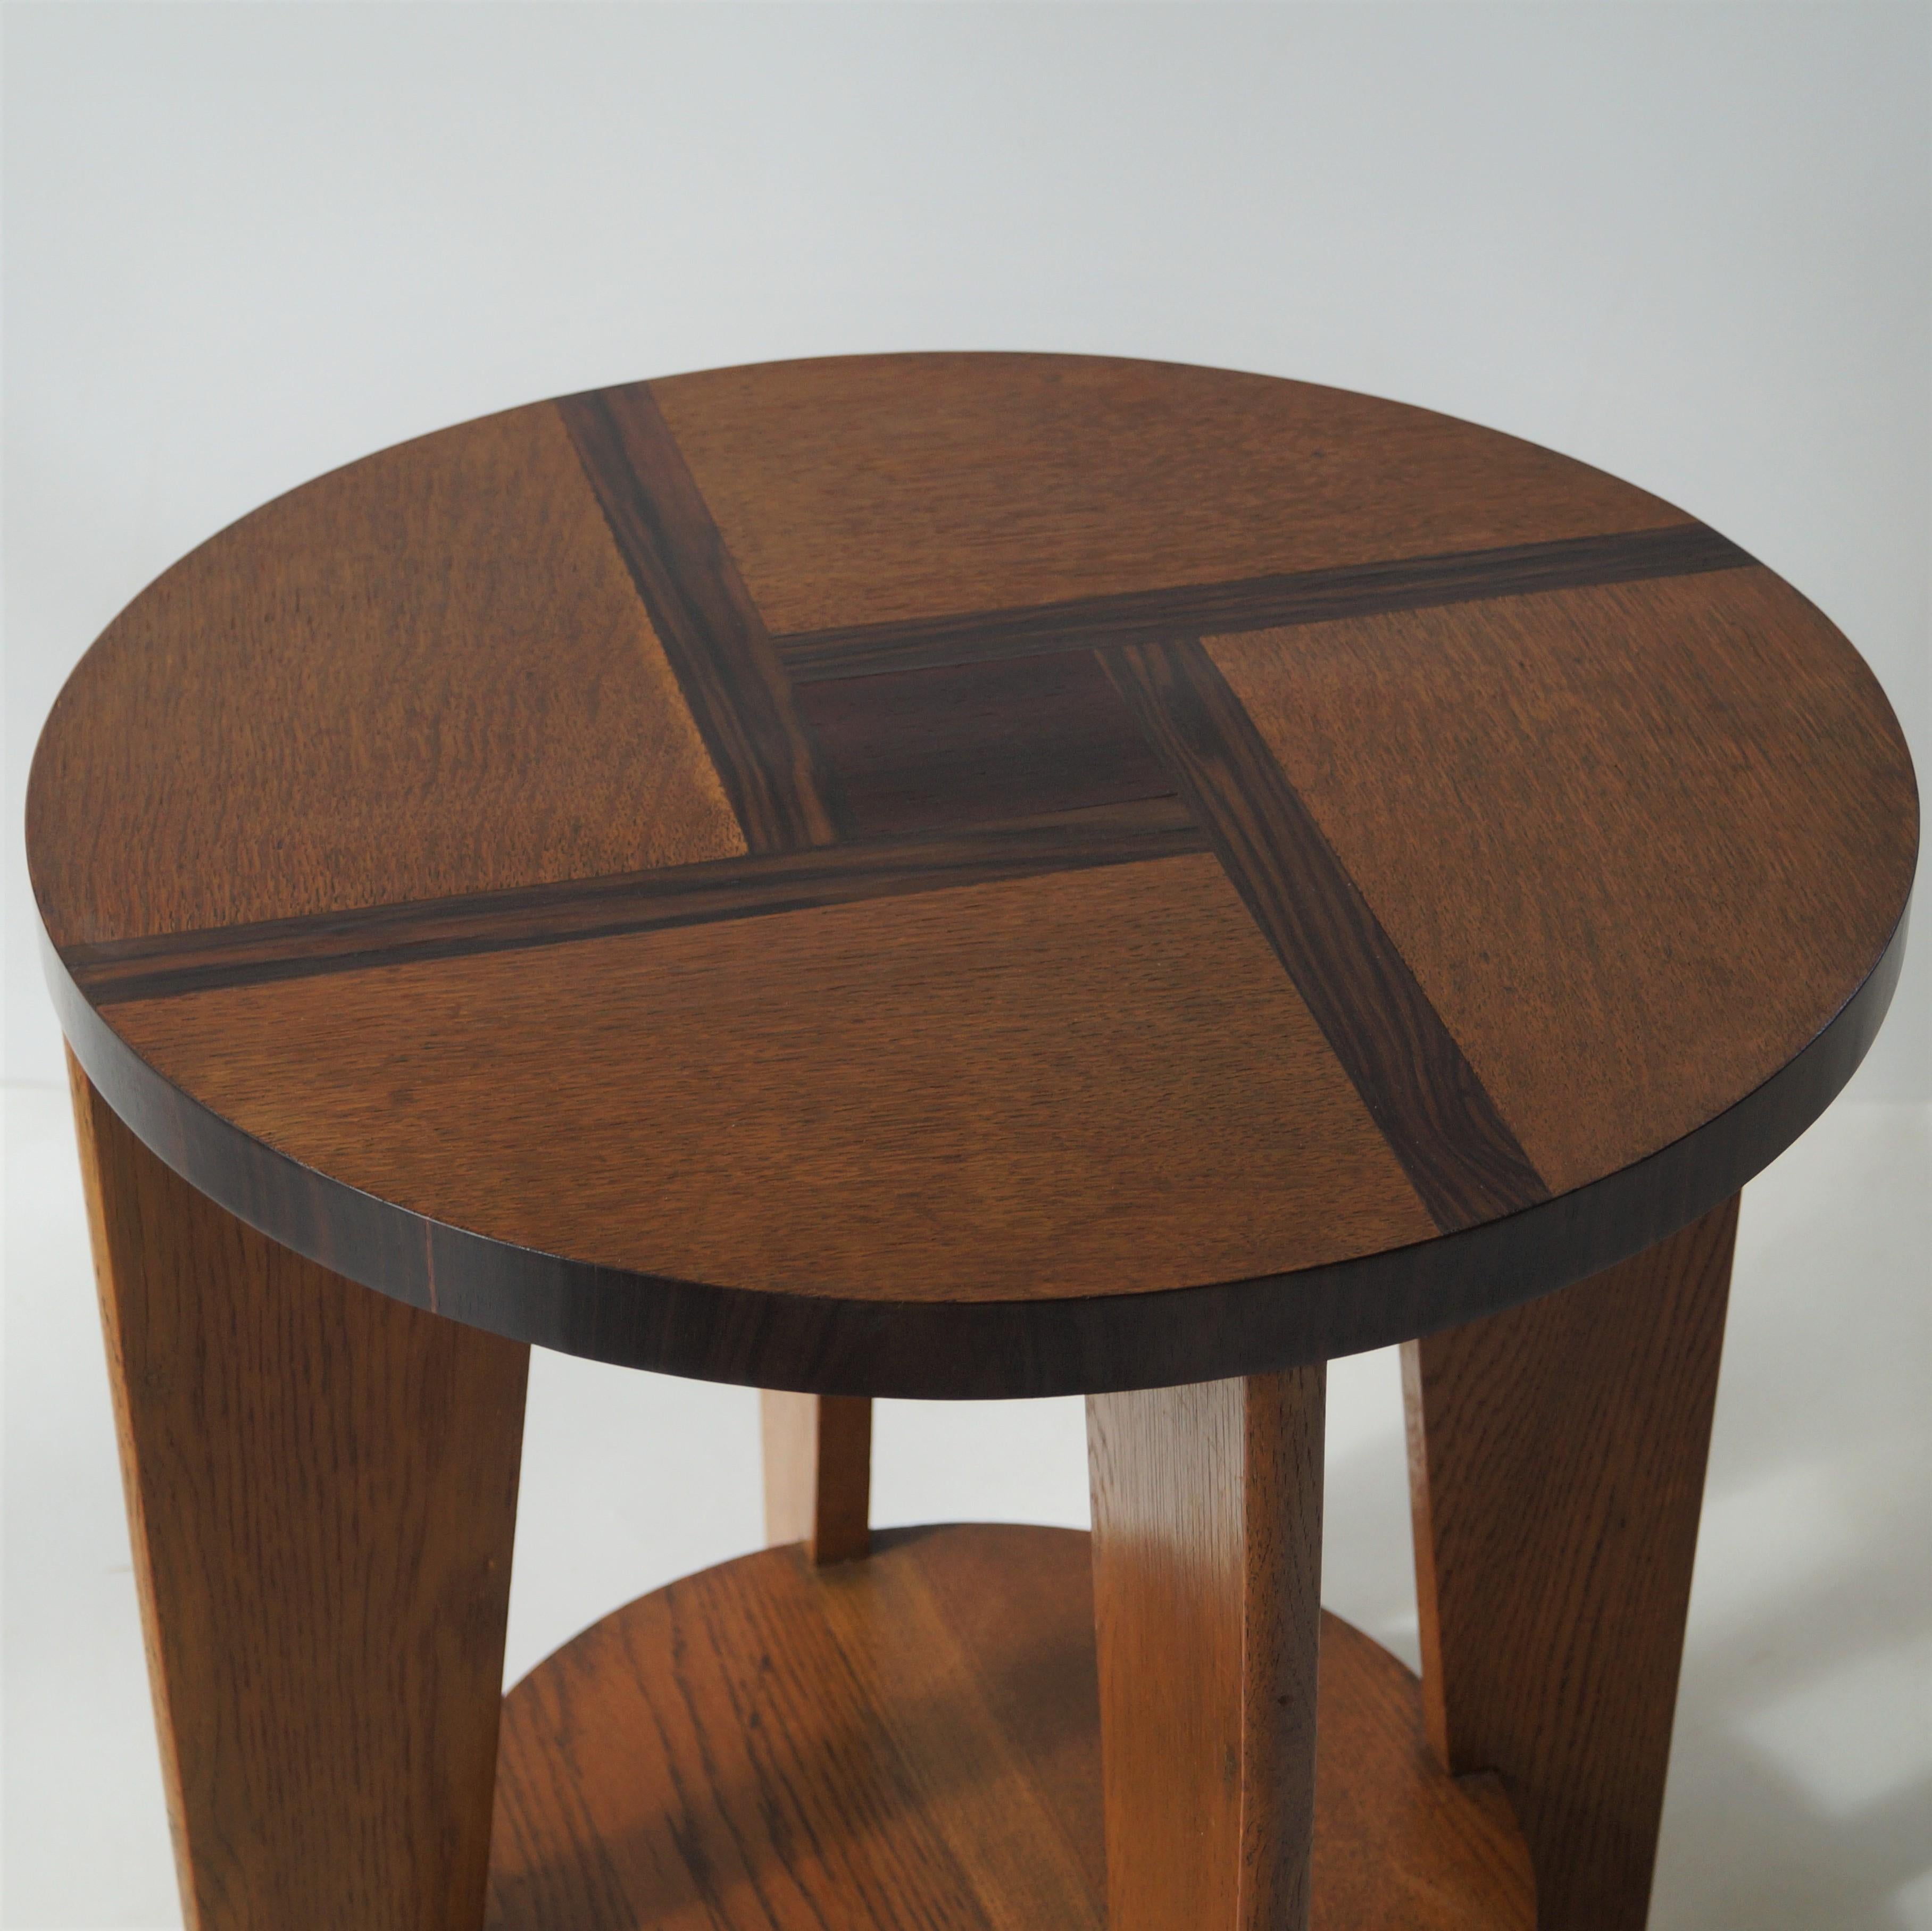 Dutch Art Deco Occasional Table Haagse School, 1930s For Sale 4